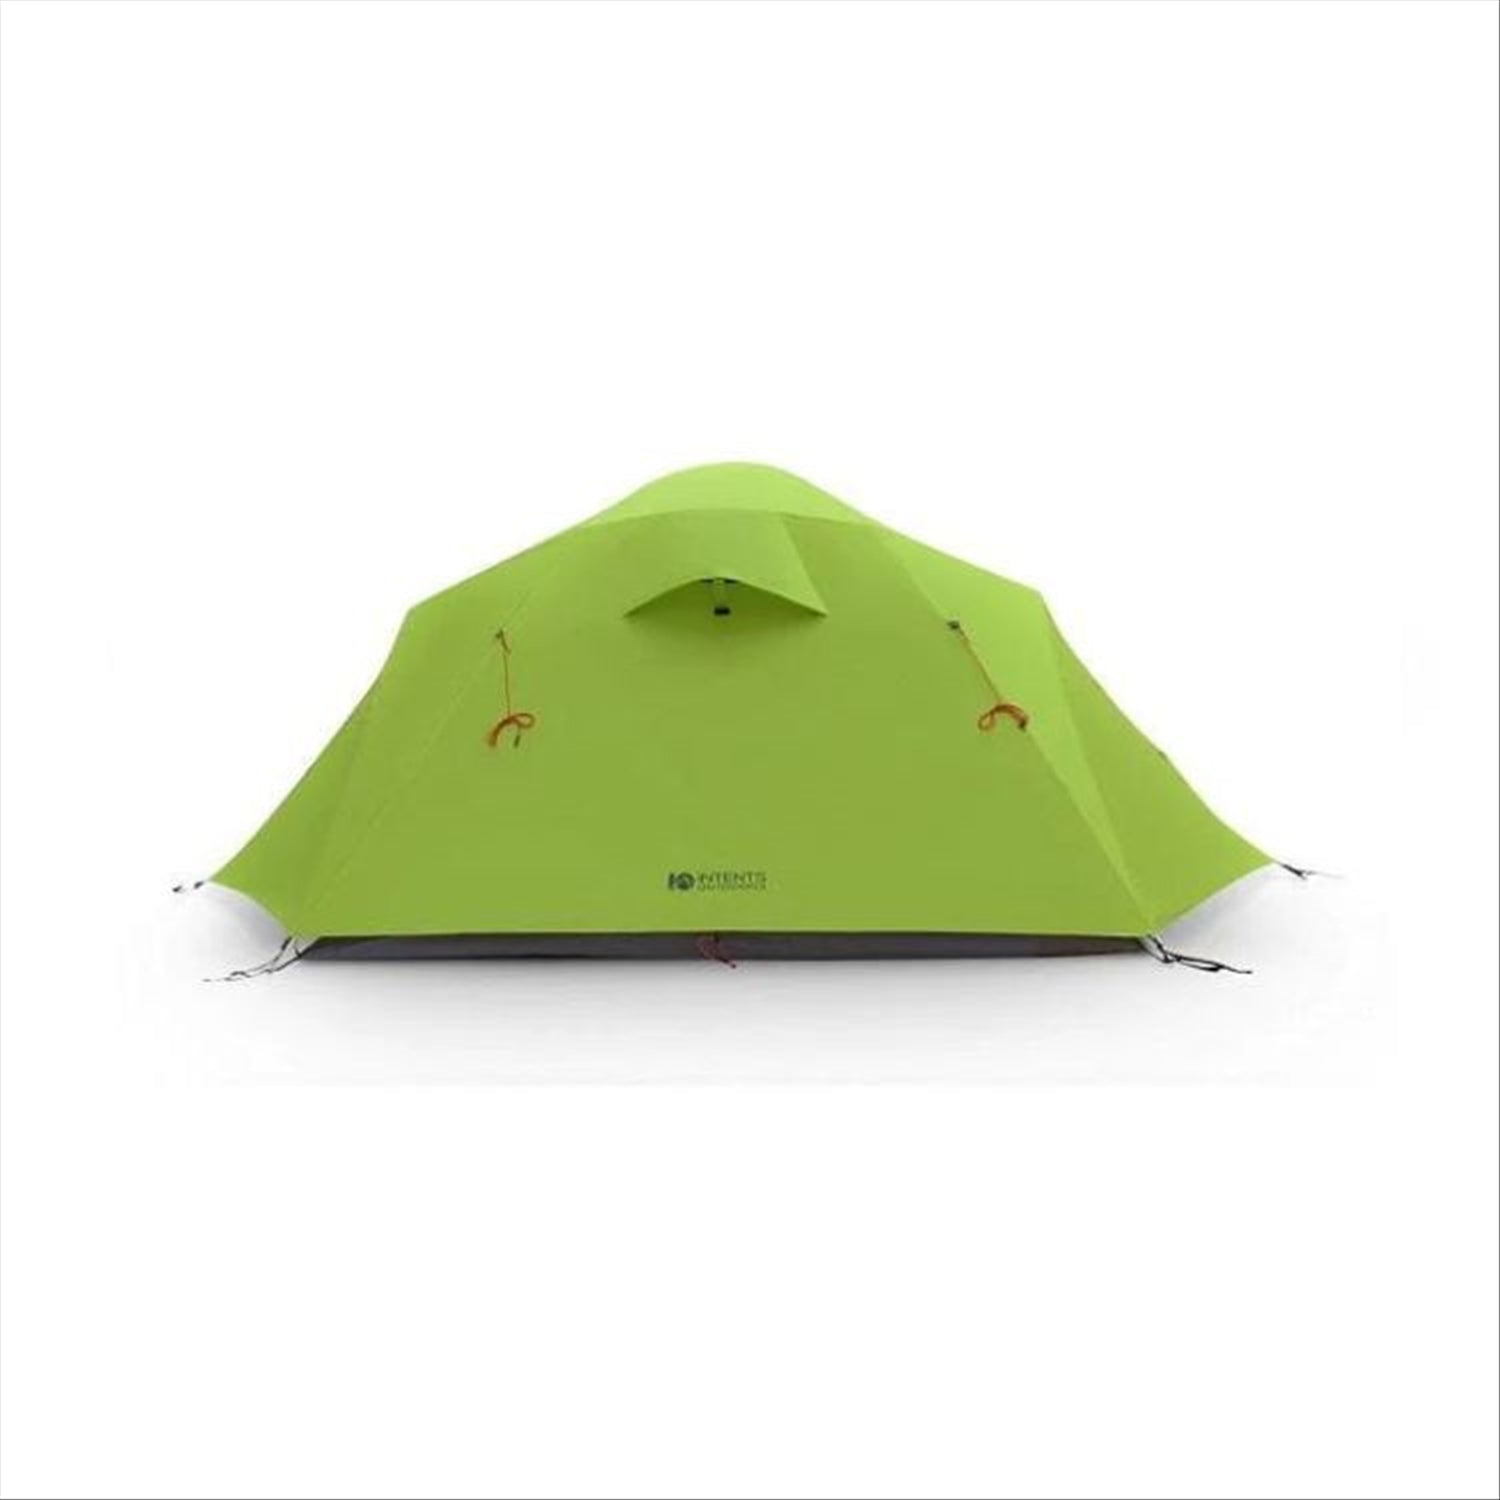 Titan 3 - 'All Weather Series' Camping Tent, 3 Person, 3.75kg